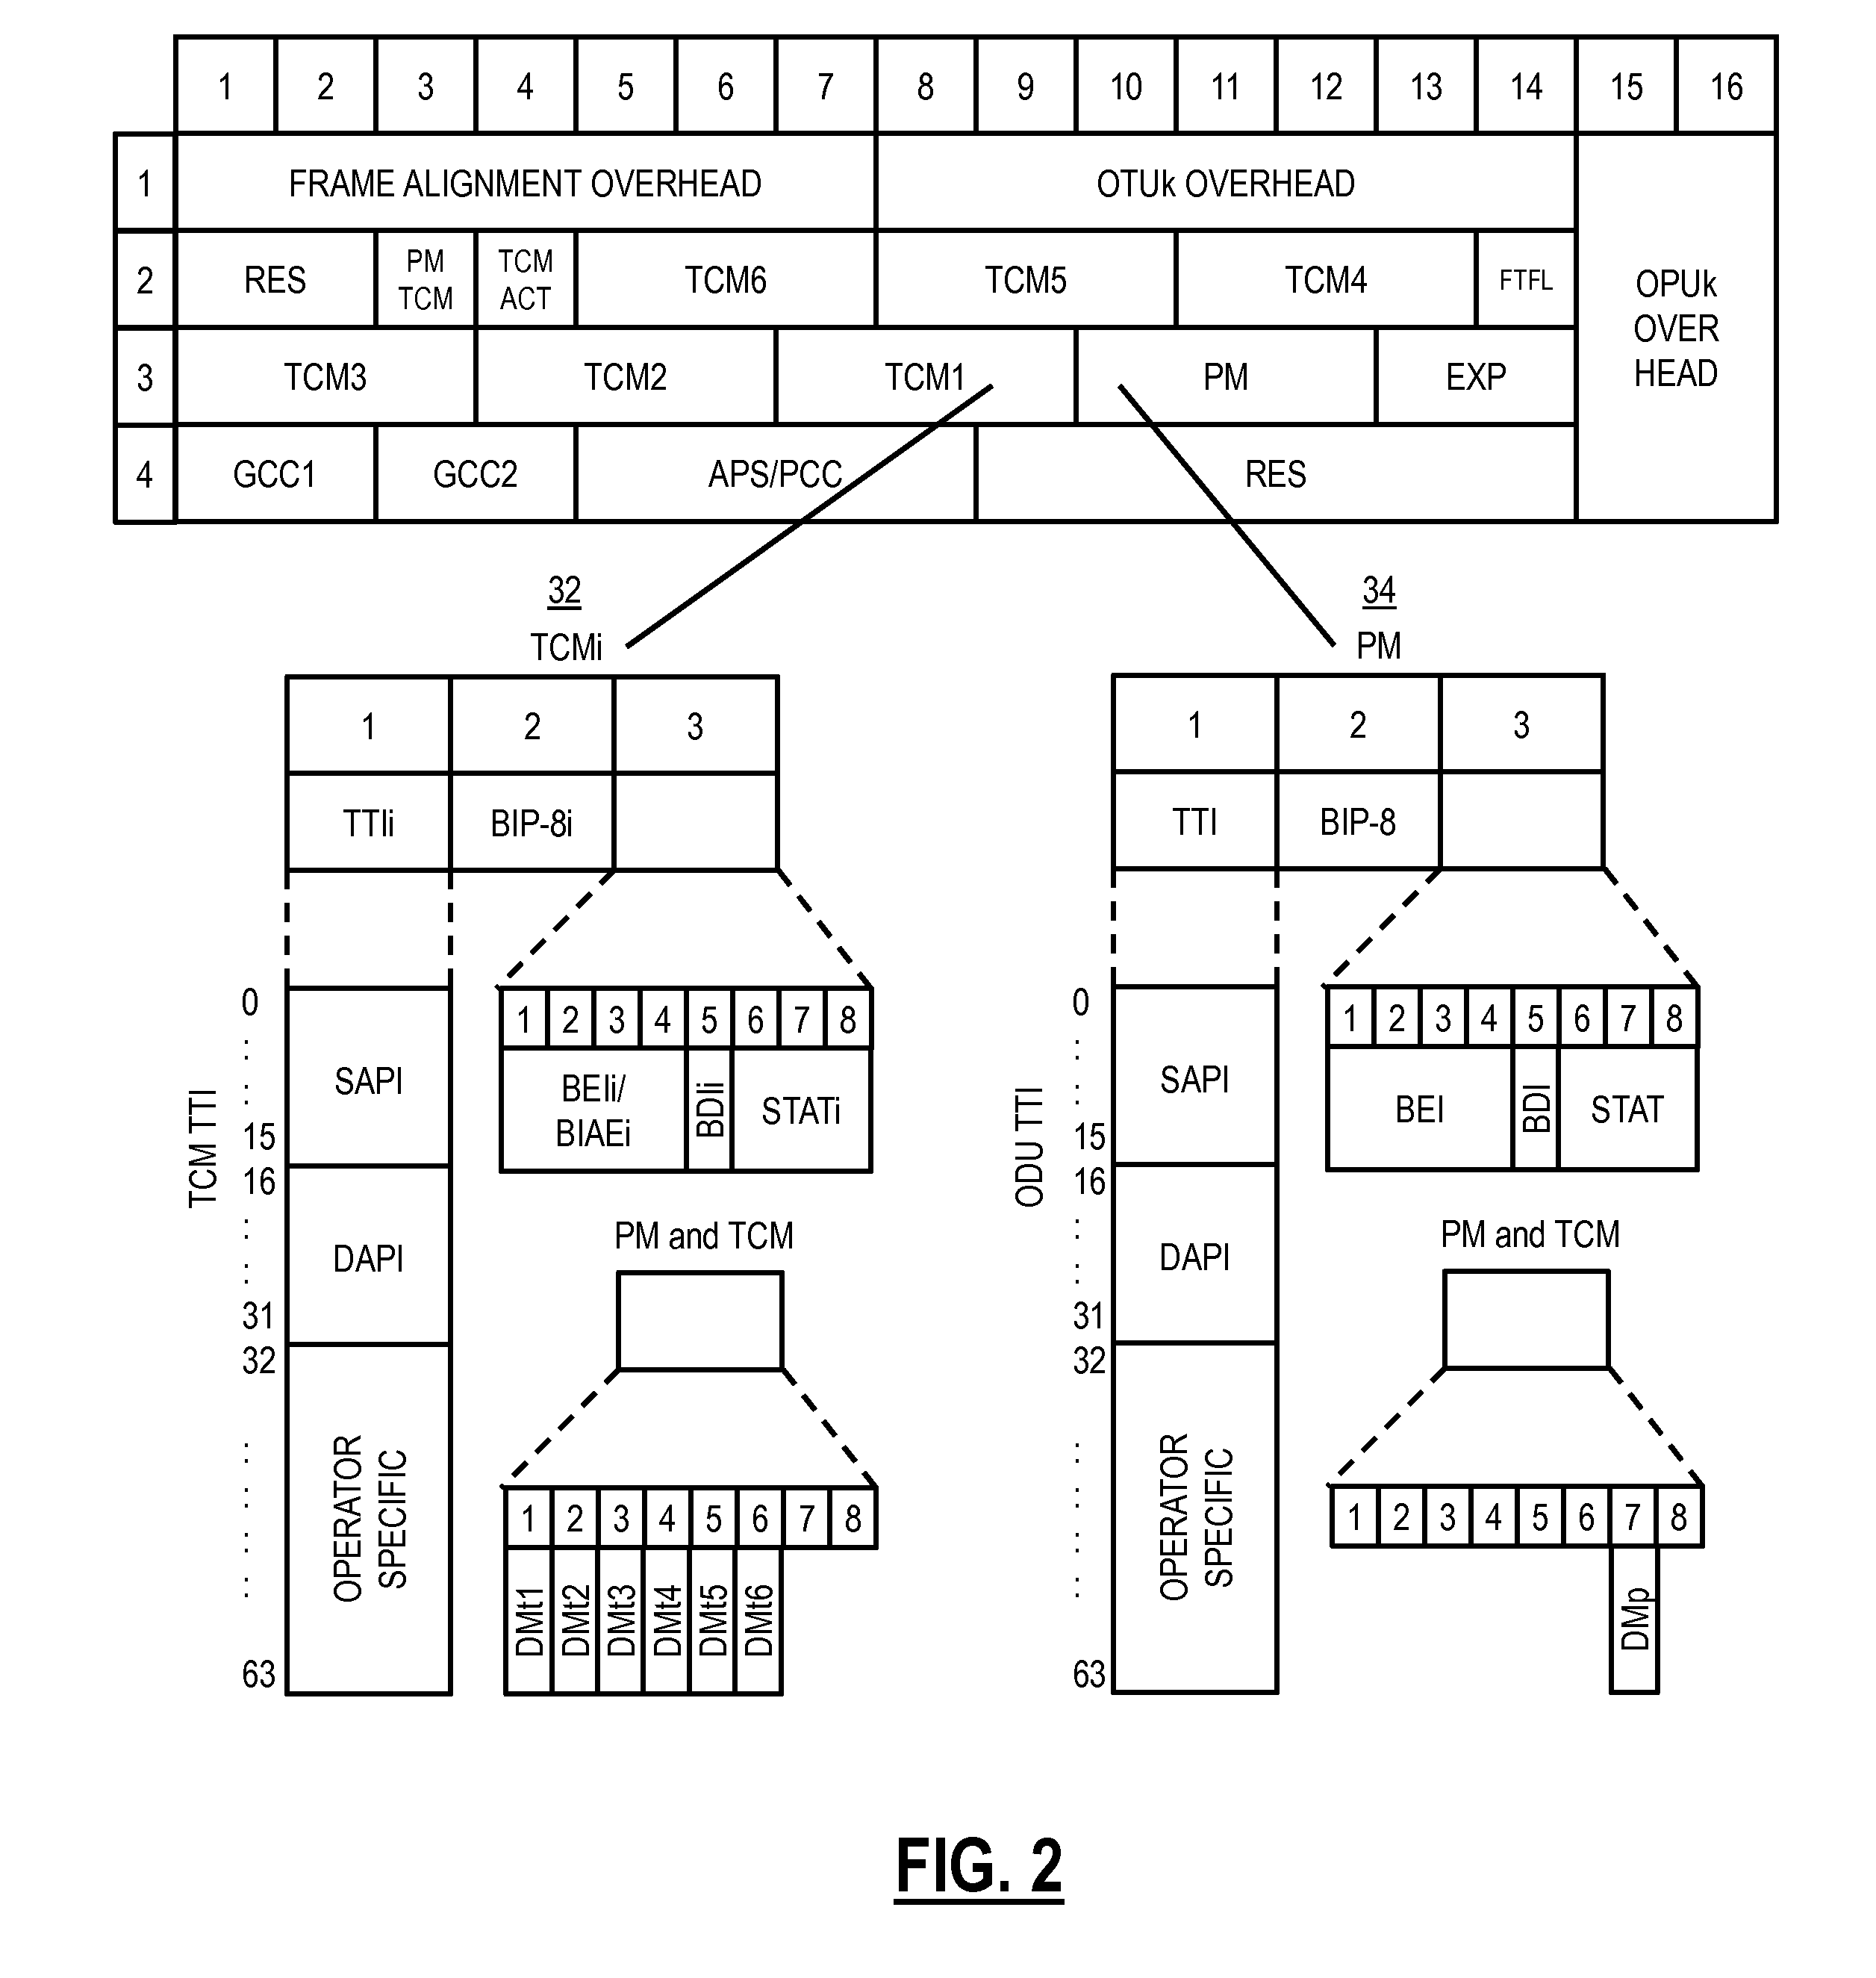 Otn switching systems and methods using an SDN controller and match/action rules